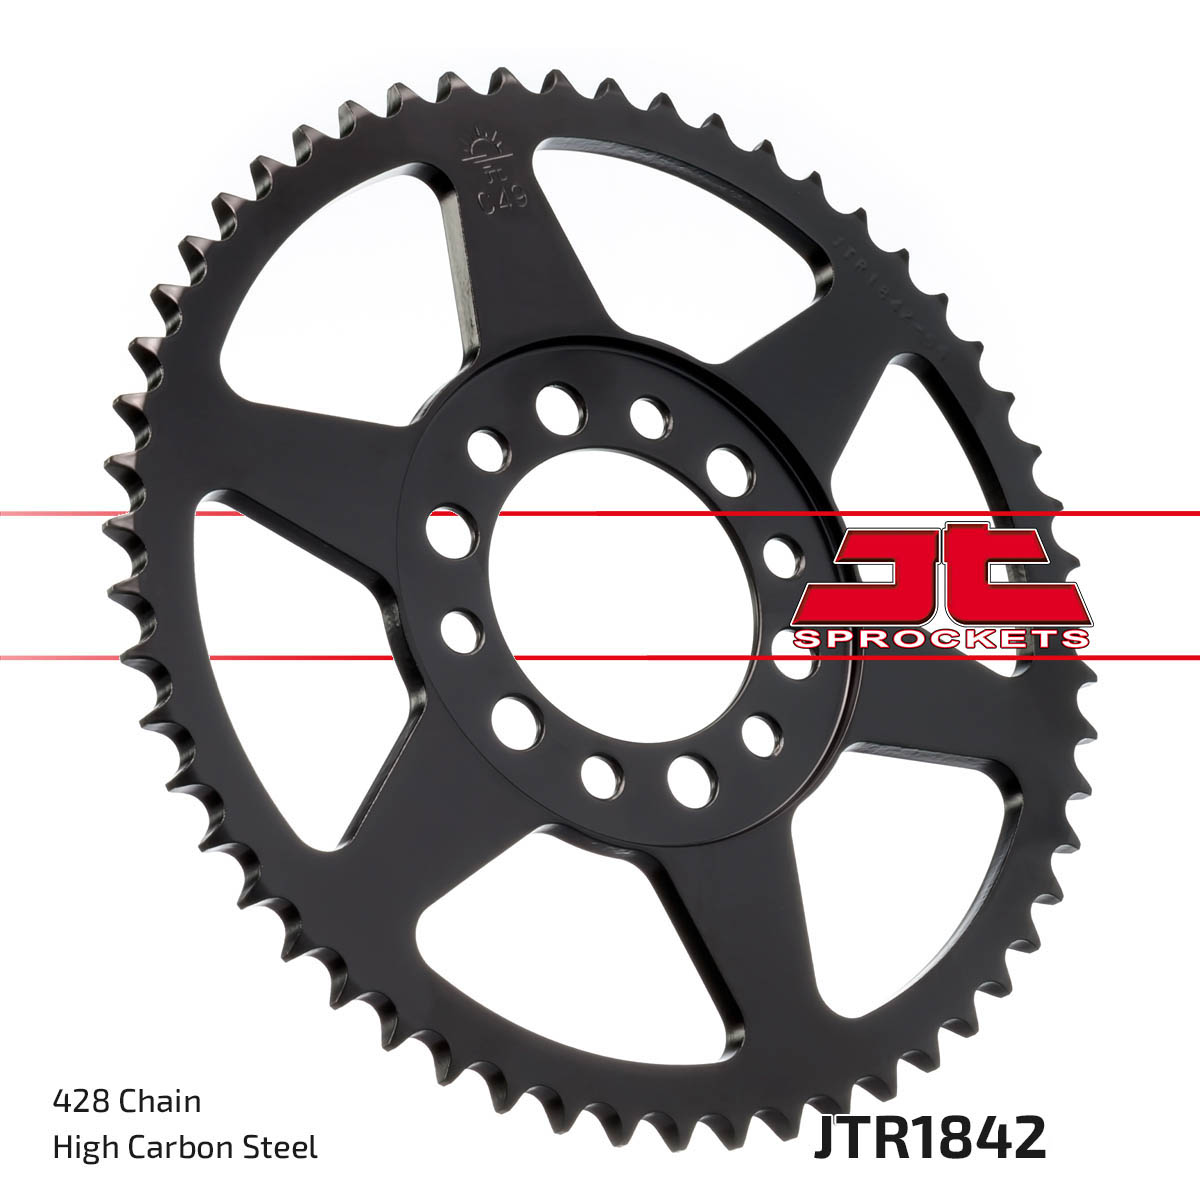 Steel Rear Sprocket - 51 Tooth 428 - For Yamaha TW200 YZ80 XT DT MX - Click Image to Close